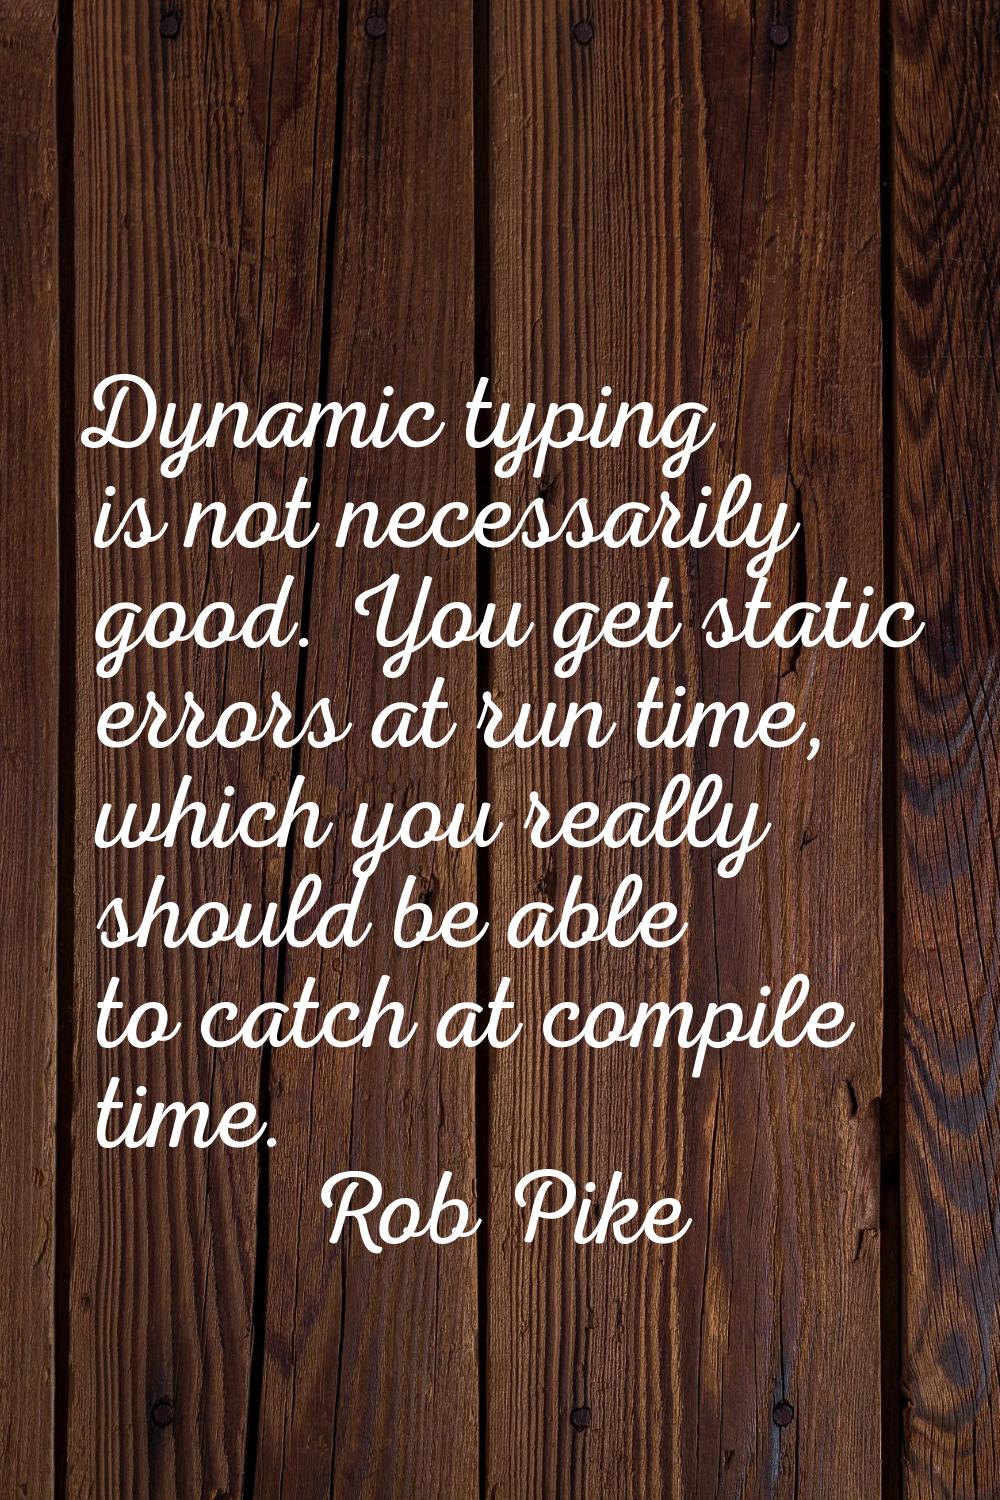 Dynamic typing is not necessarily good. You get static errors at run time, which you really should 